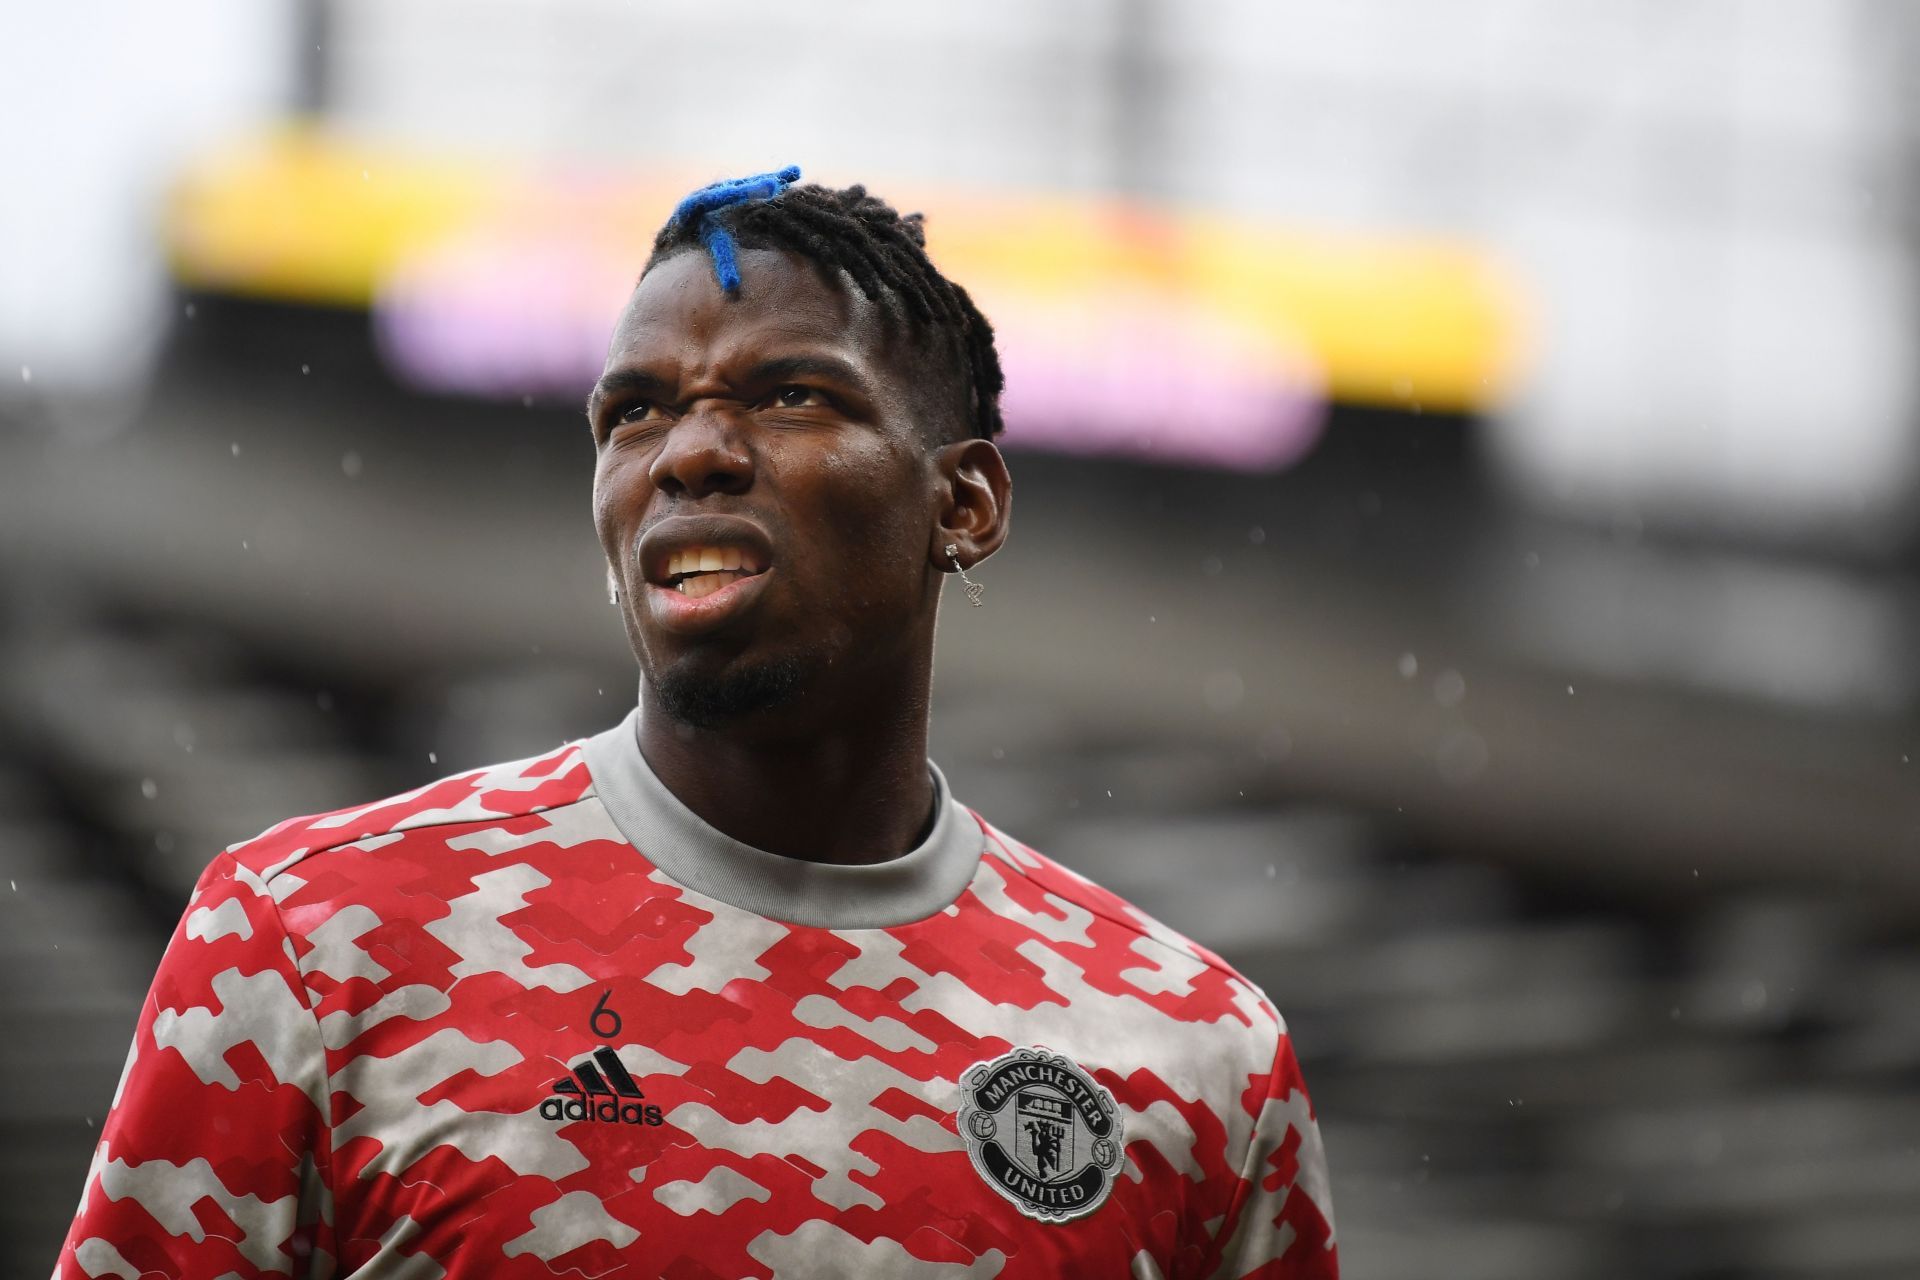 Paul Ince has criticised Manchester United for offering Paul Pogba a new contract with a huge salary.